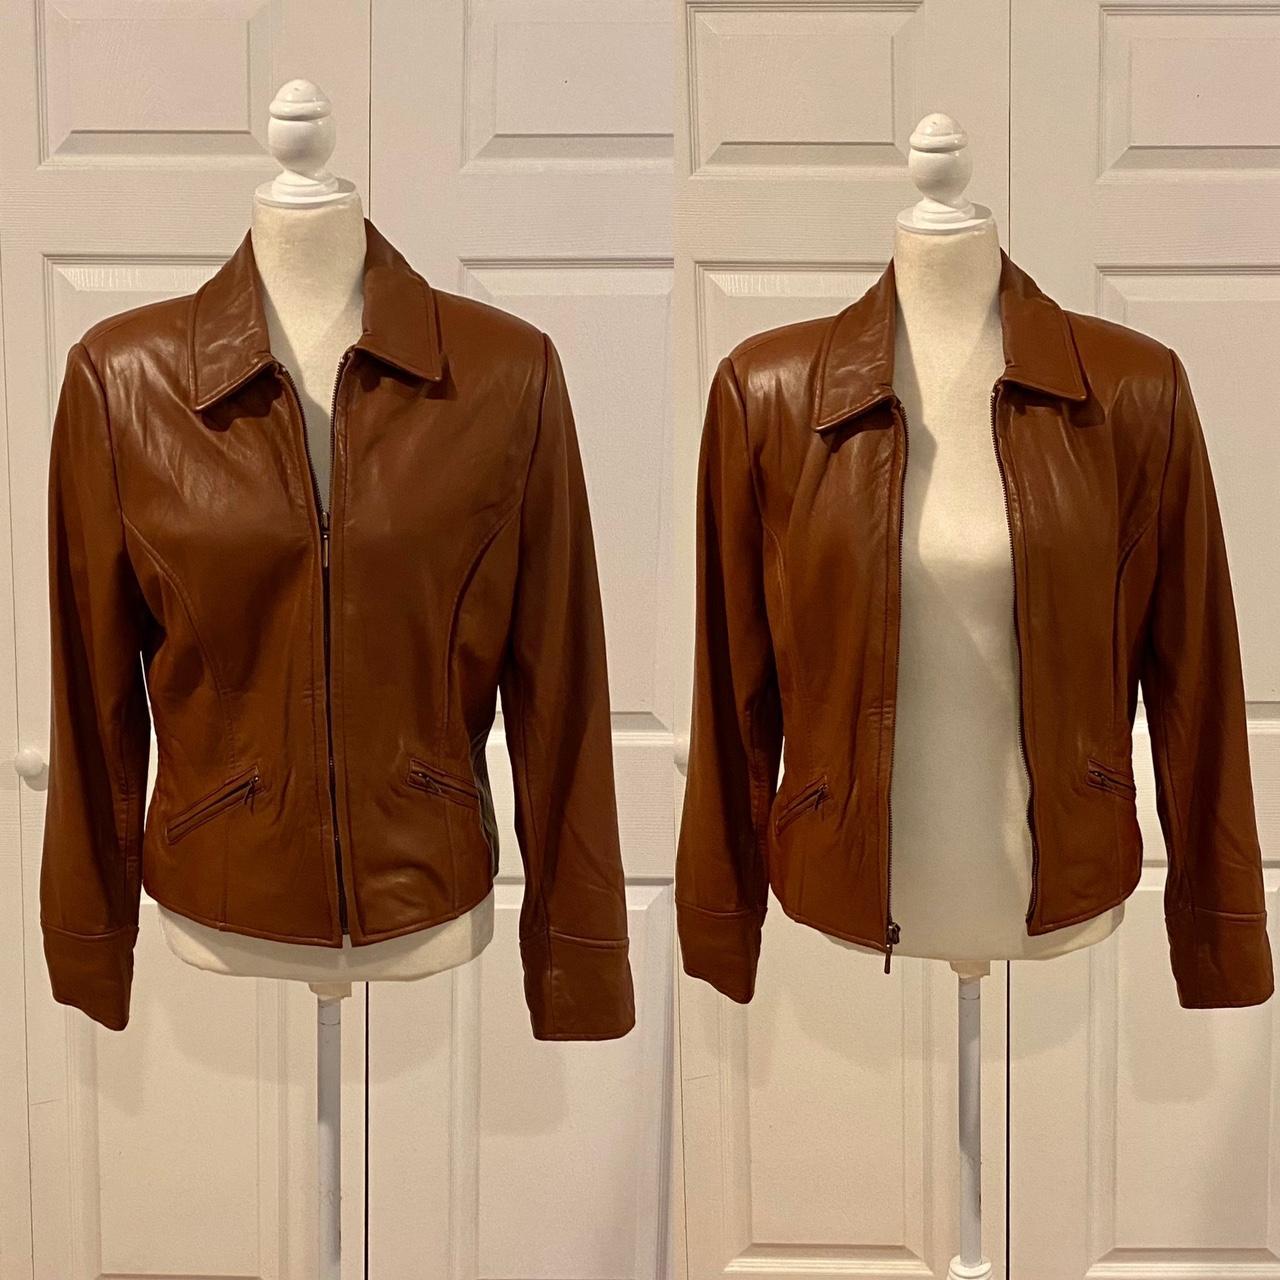 Product Image 3 - vintage soft leather jacket

FEATURES:
beauuutiful true